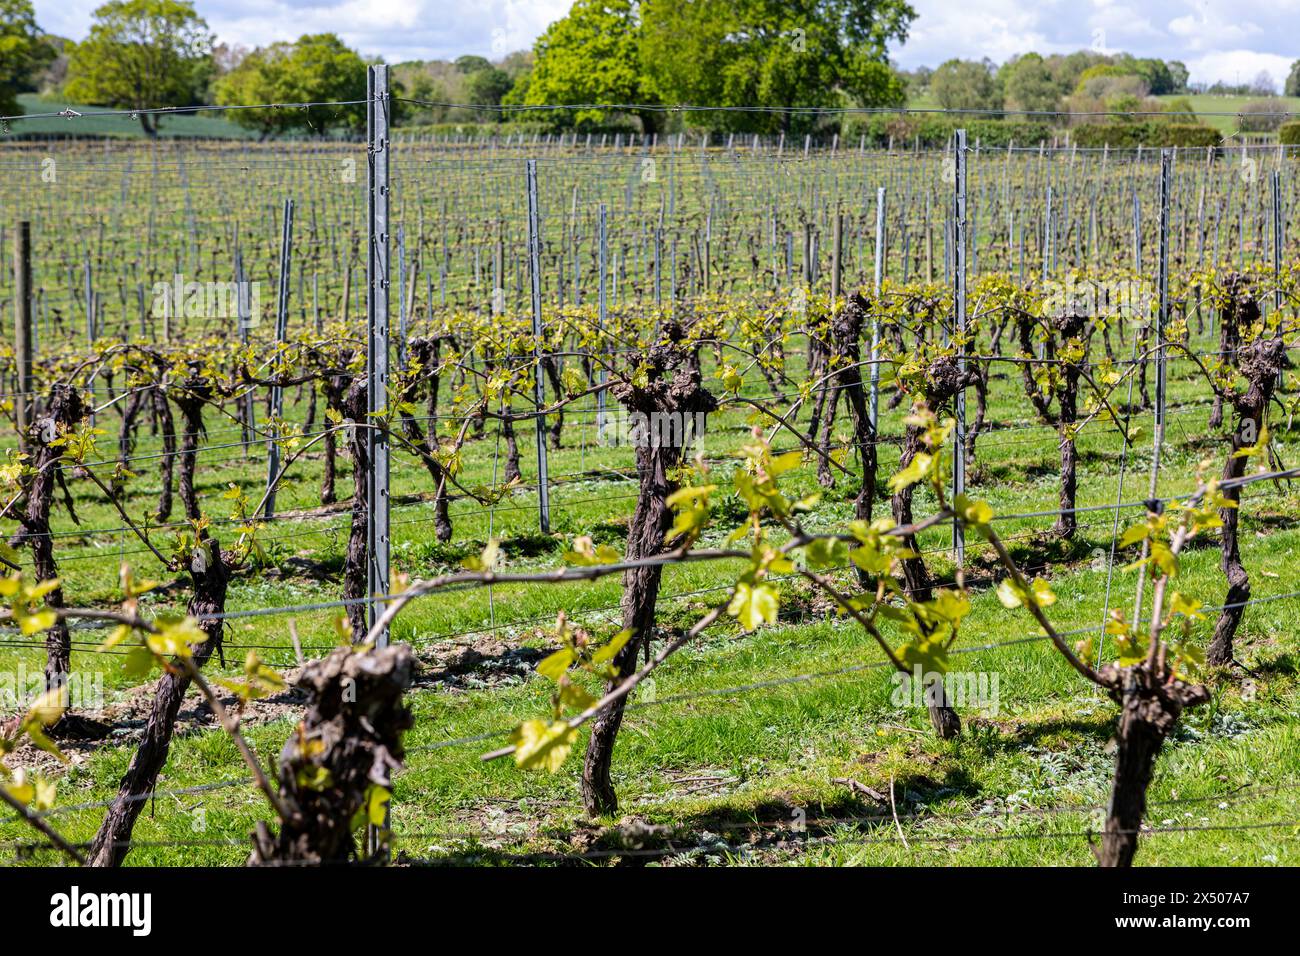 A field of grape vines at Chapel Down Winery, Tenterden, Kent, UK Stock Photo